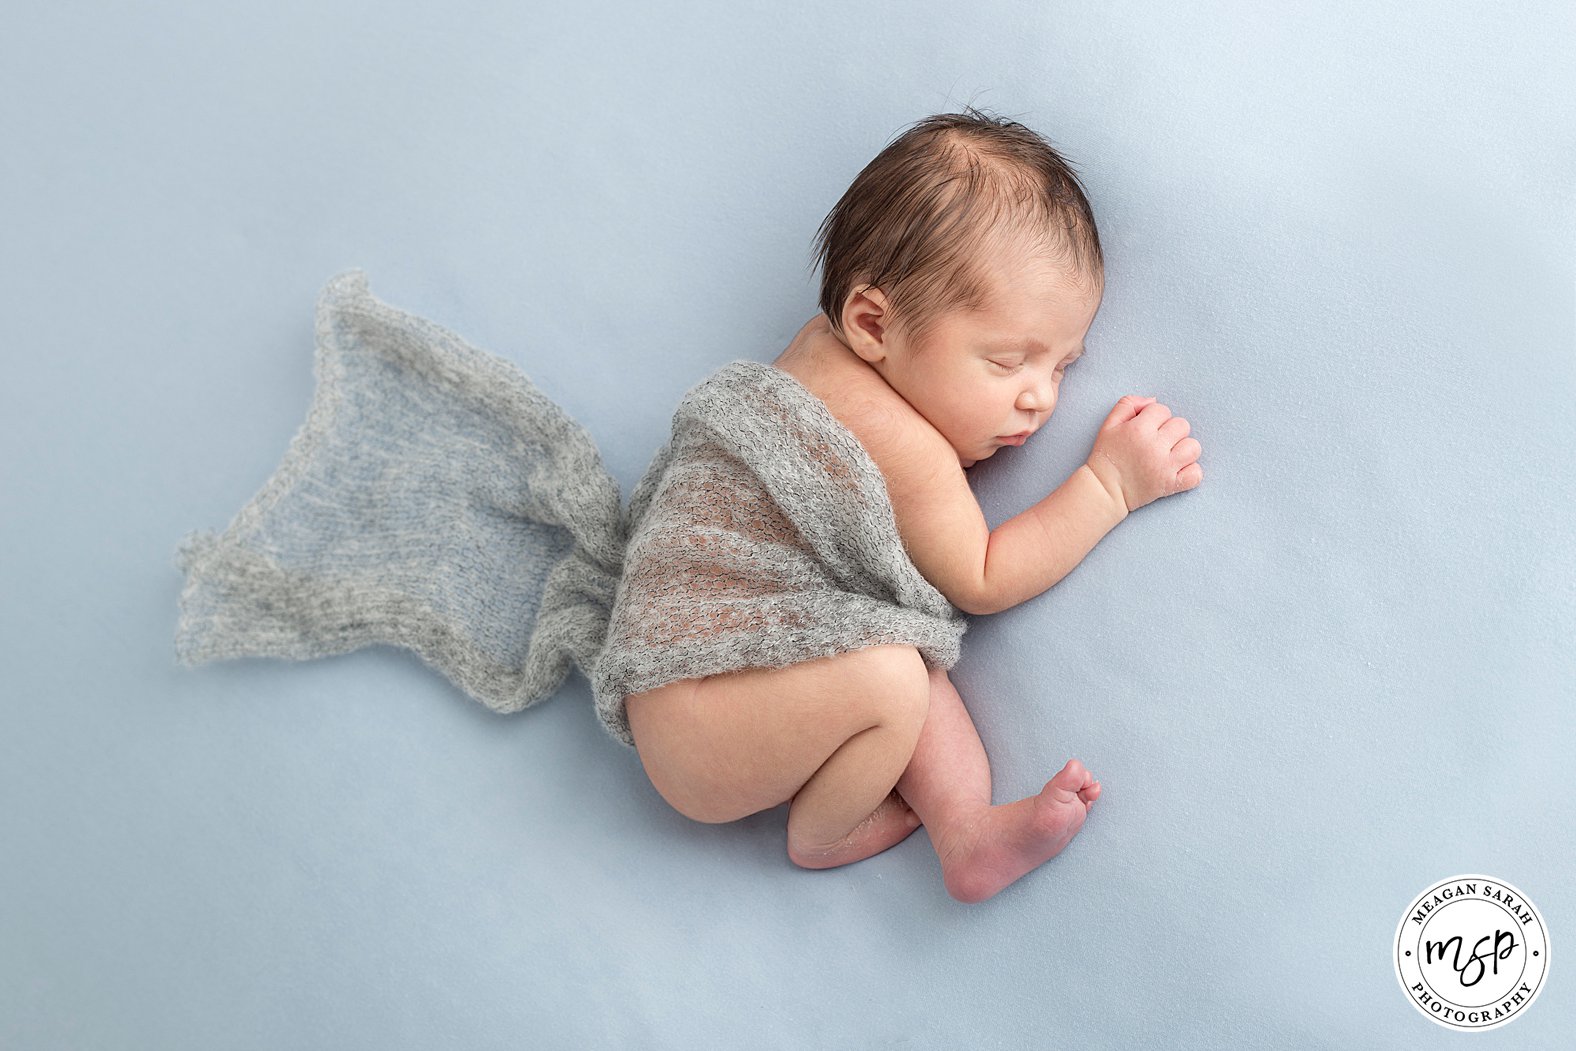 Blue,Baby Photographer Leeds,Baby Photography Leeds,Leeds Newborn Photographer,Leeds Newborn Photography,Leeds Photographer,Professional Photographer in Leeds,West Yorkshire Photographer,Yorkshire Newborn Photographer,Yorkshire Newborn Photography,Side,Birds eye view on front,